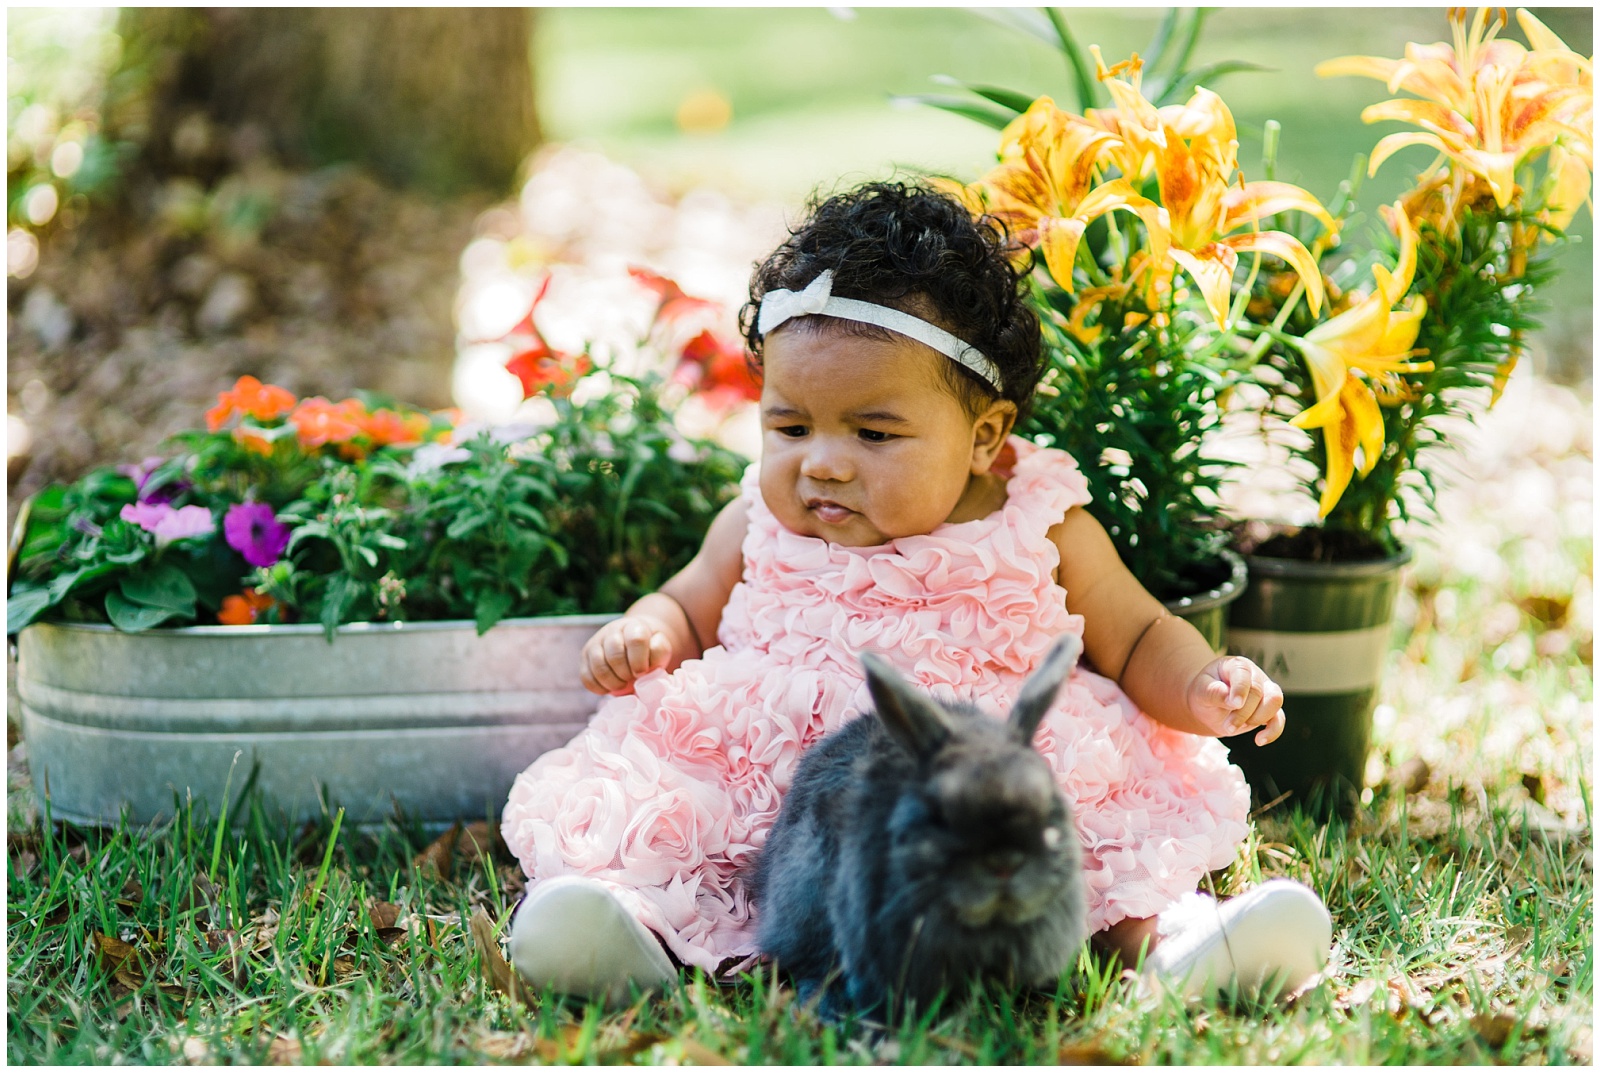 We thought it would be so cute to do Easter photos with our daughter's bunny named Thumper!  But as you can see, Abi wasn't so sure about it. Heehee